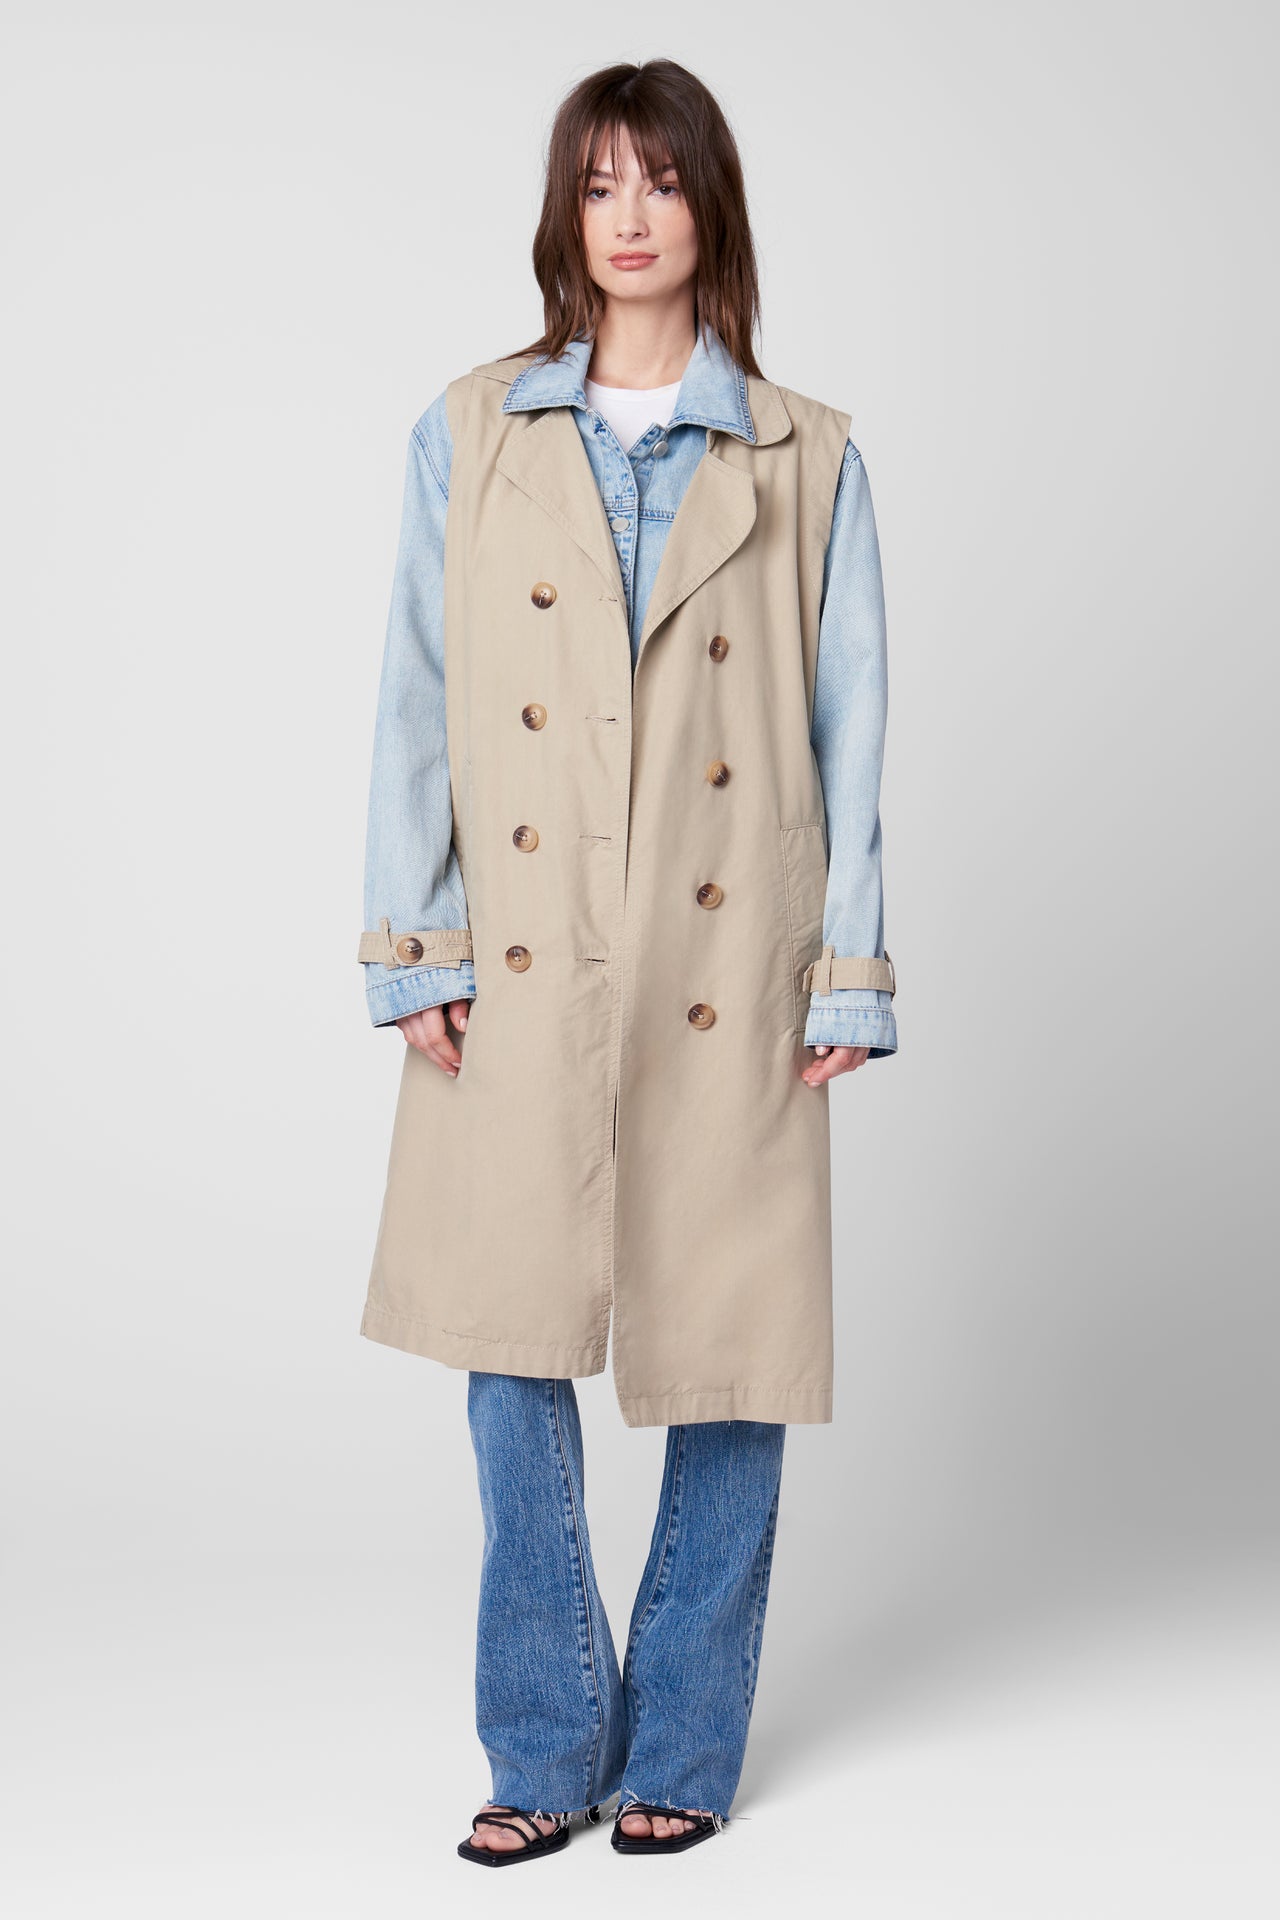 First Row Jean x Trench Coat, Coat Jacket by Blank NYC | LIT Boutique